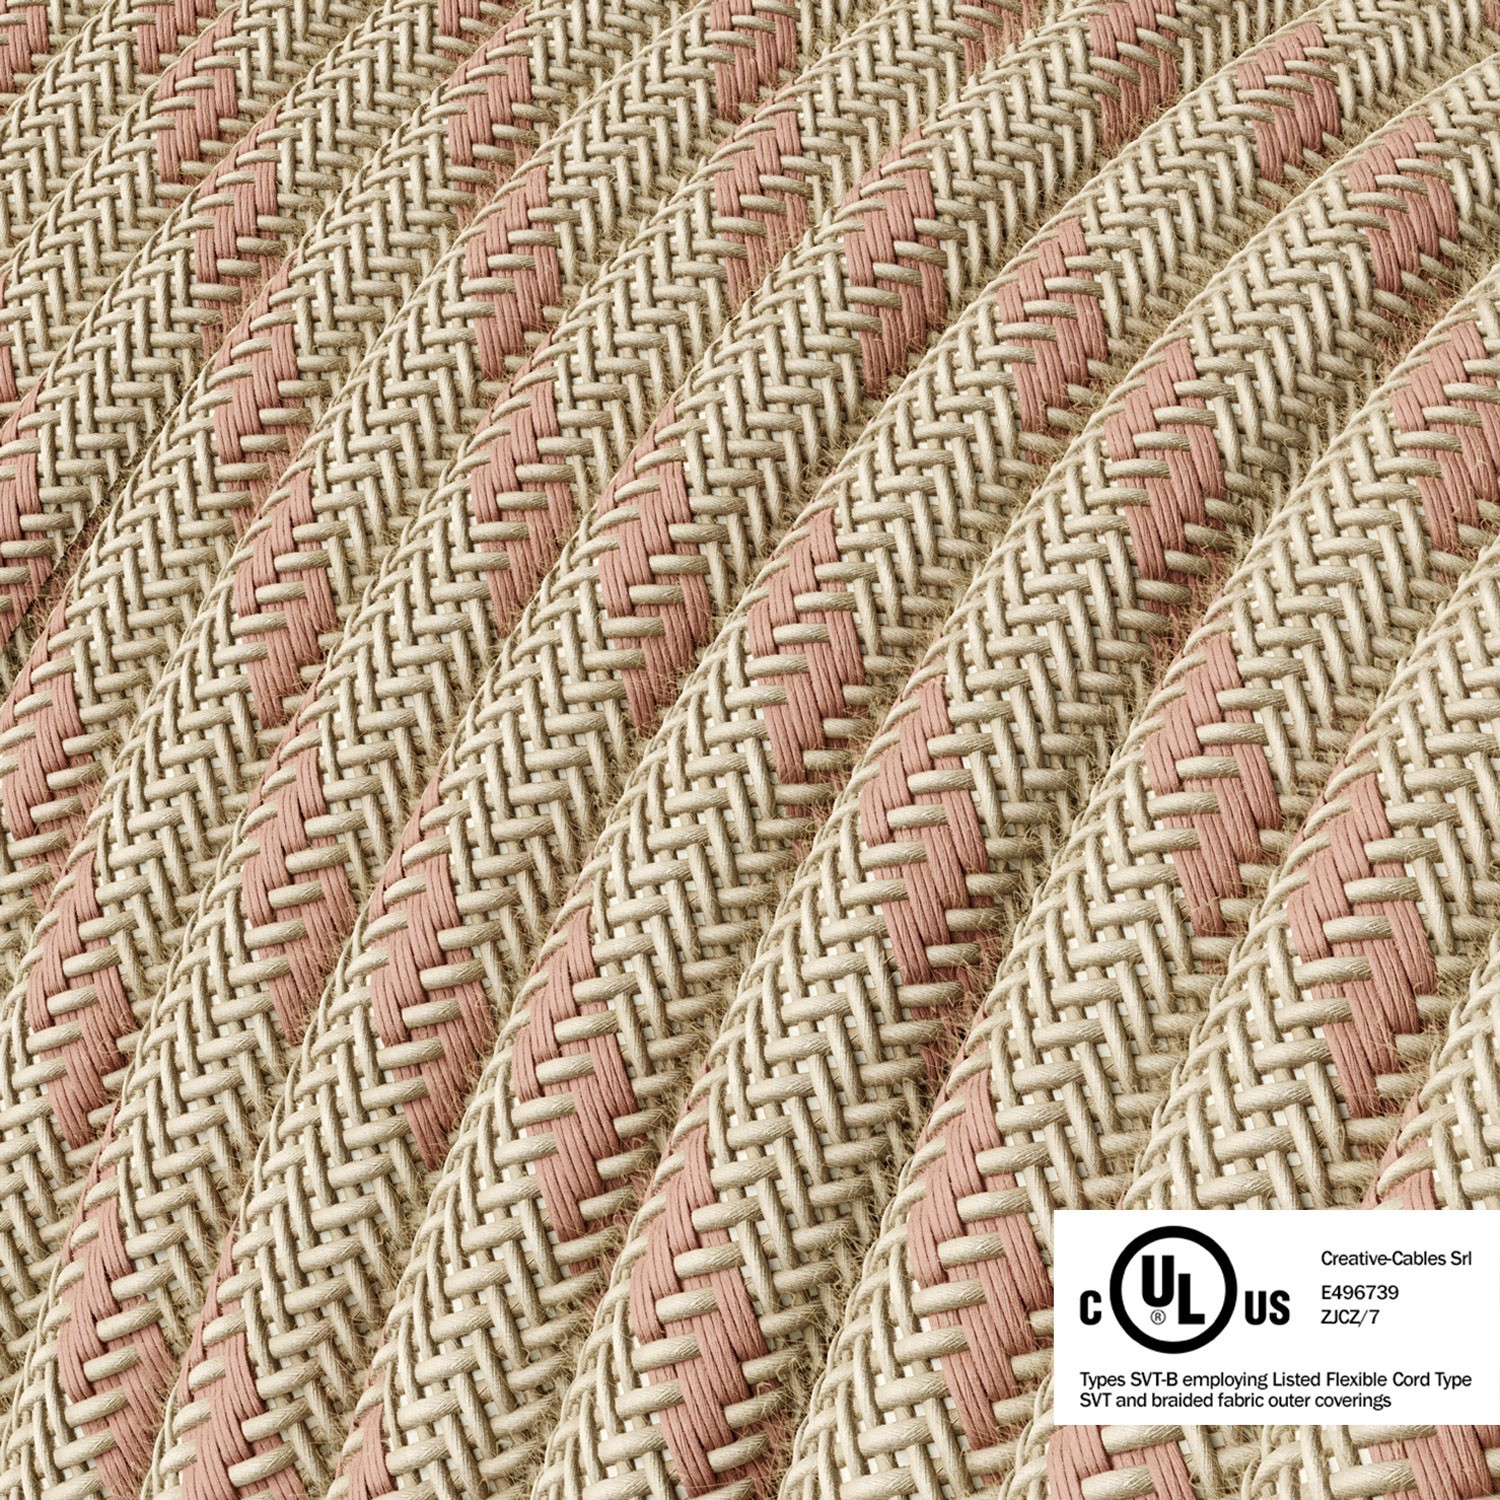 Round Electric Cable 150 ft (45,72 m) coil RD51 Stripes Ancient Pink Cotton and Natural Linen - UL listed